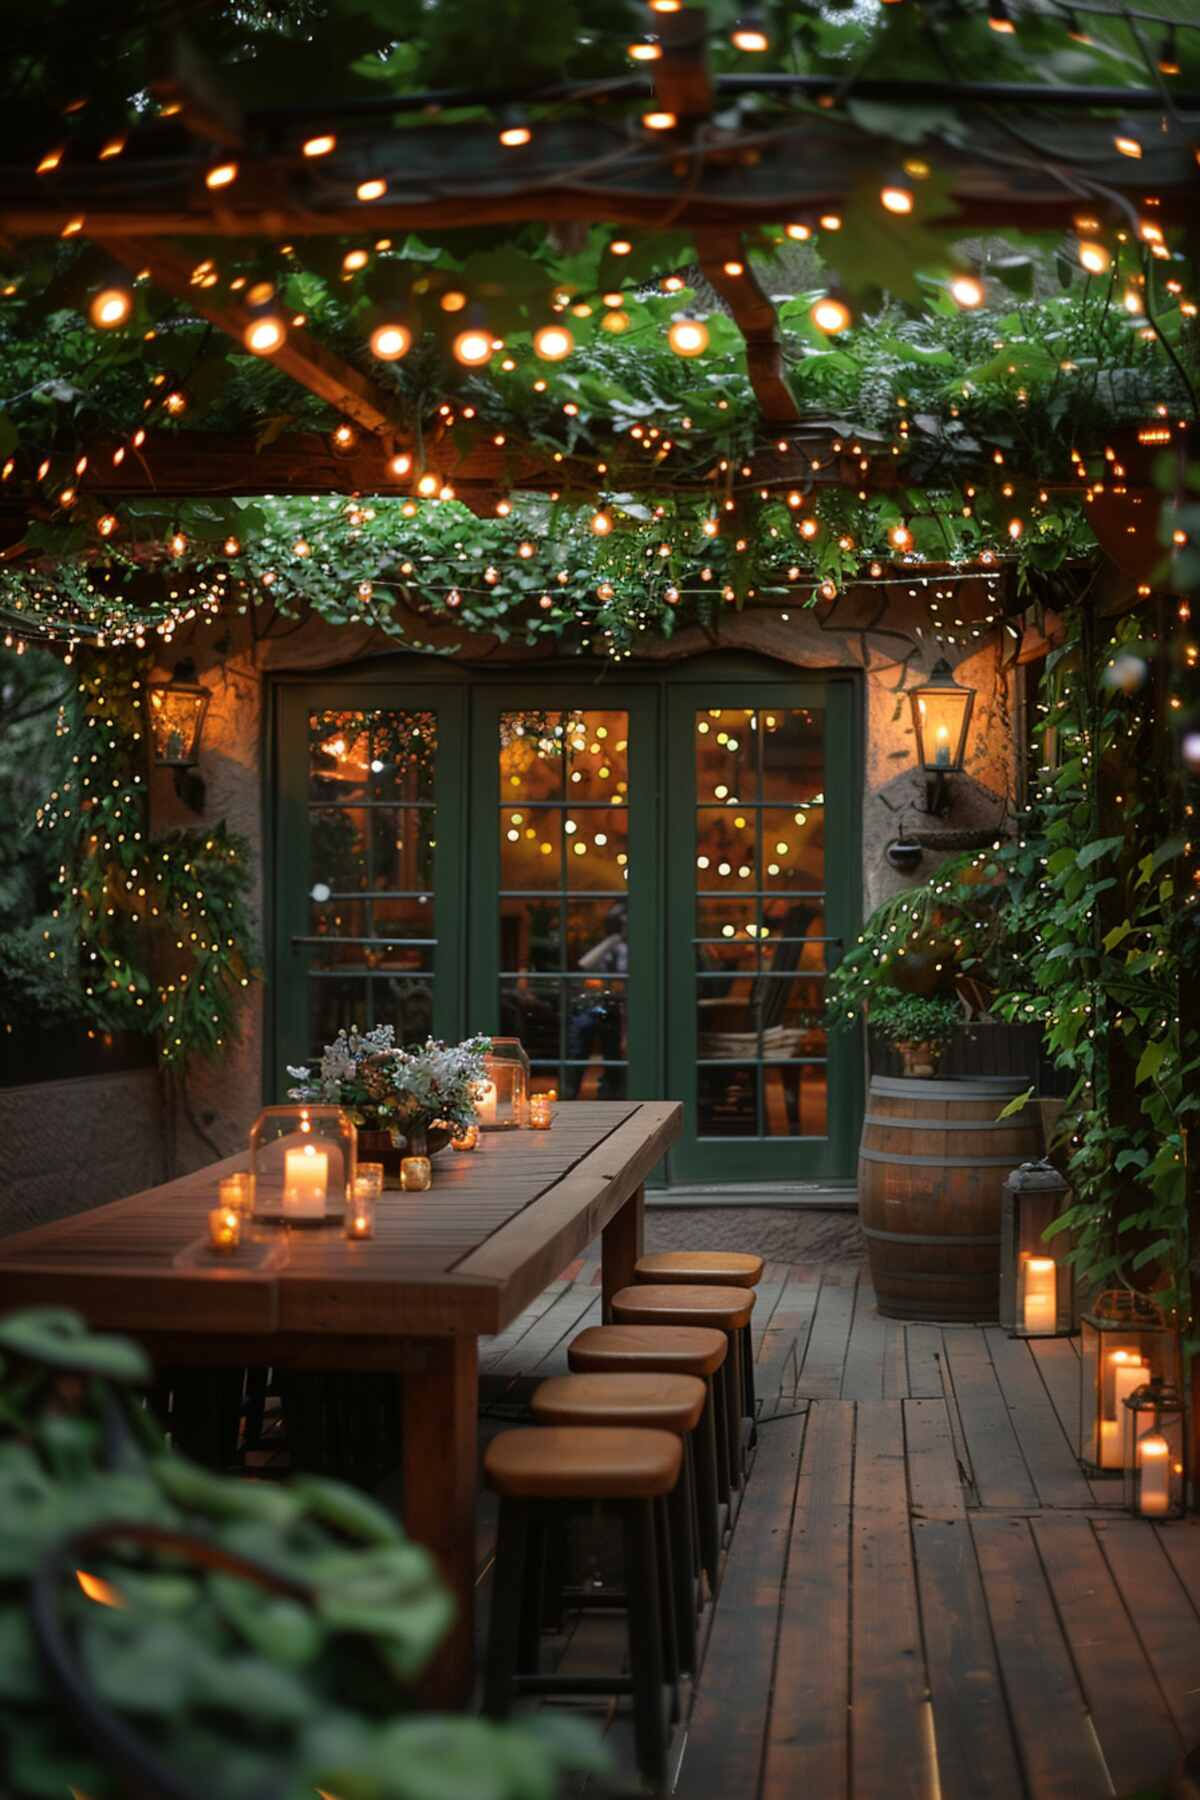 Creative Ways to Design Your Outdoor Patio Space